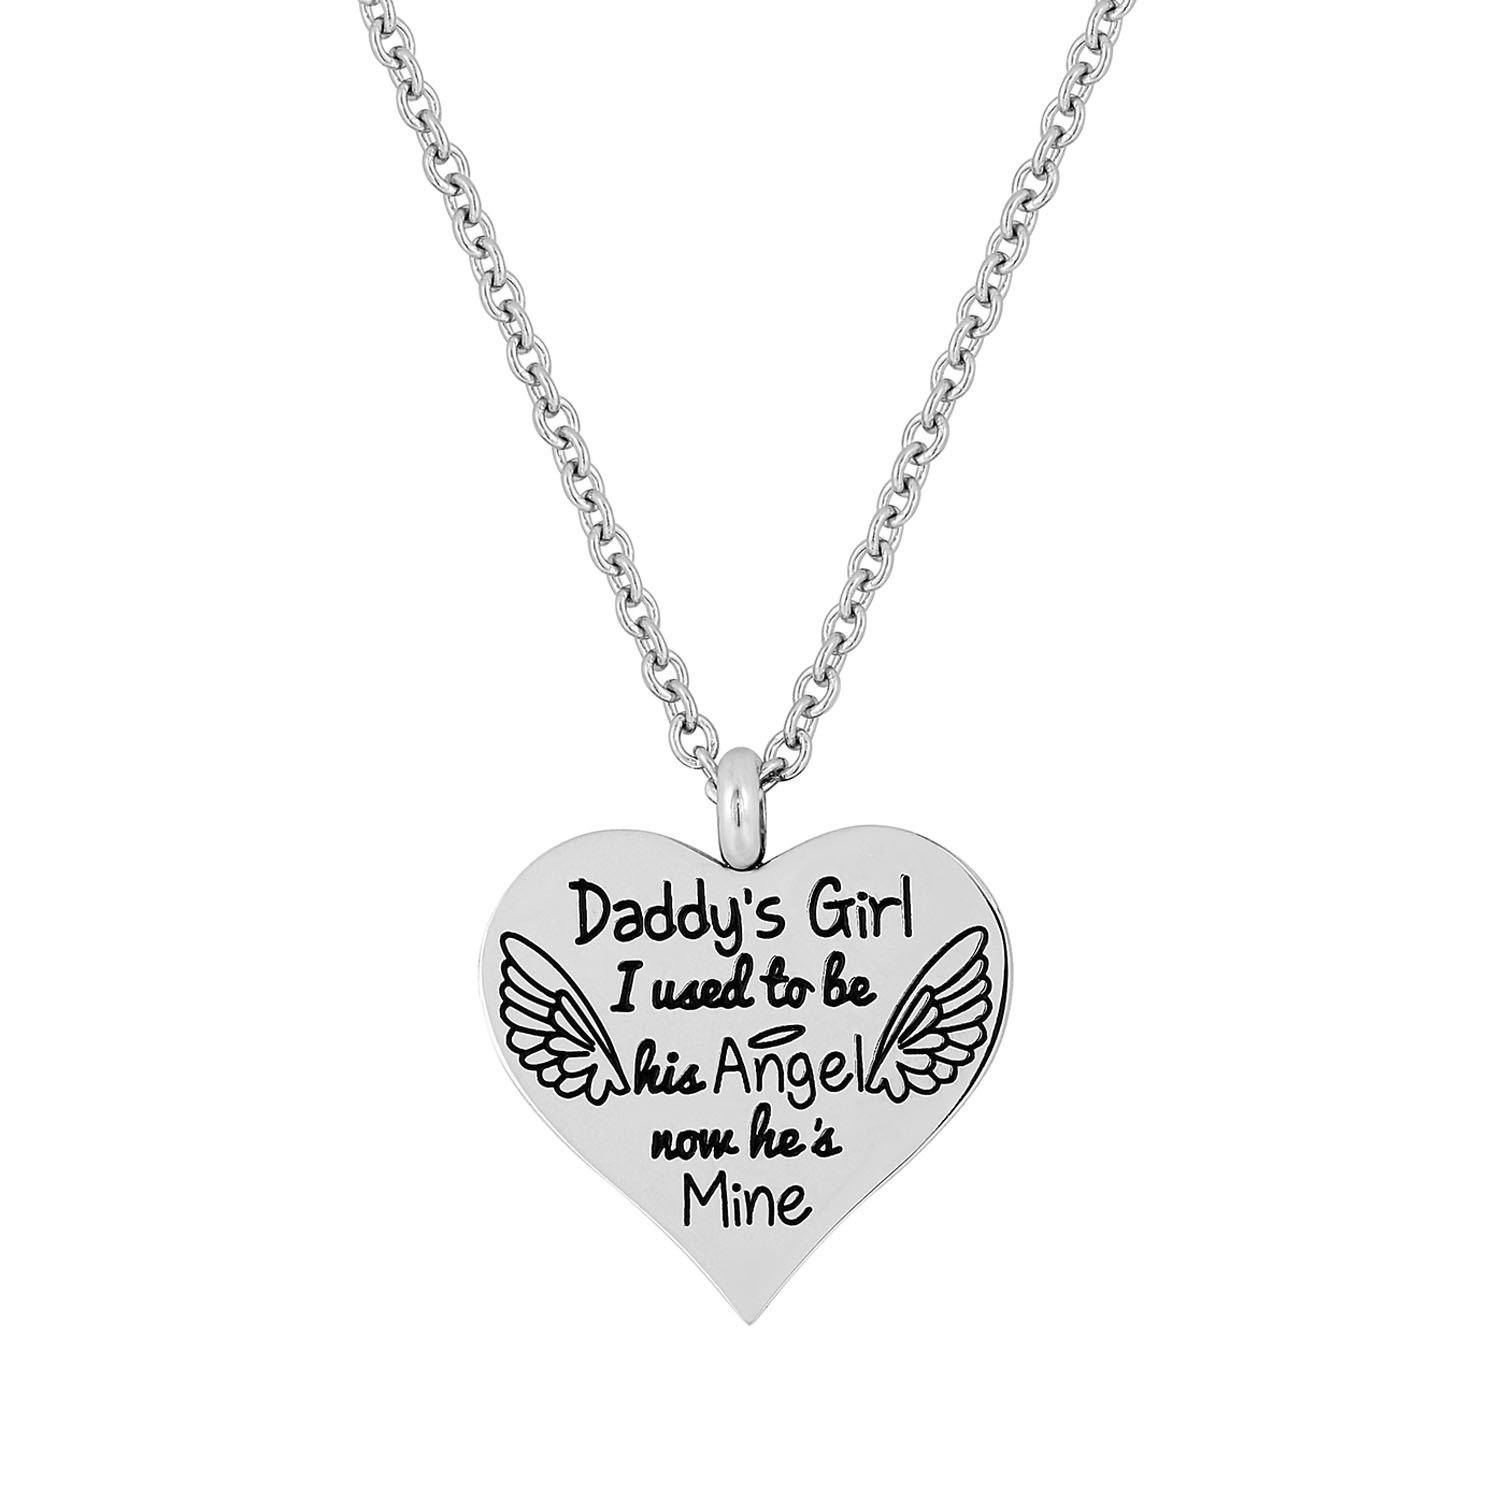 Daddy's Girl Stainless Steel Necklace - Does Not Hold Ashes